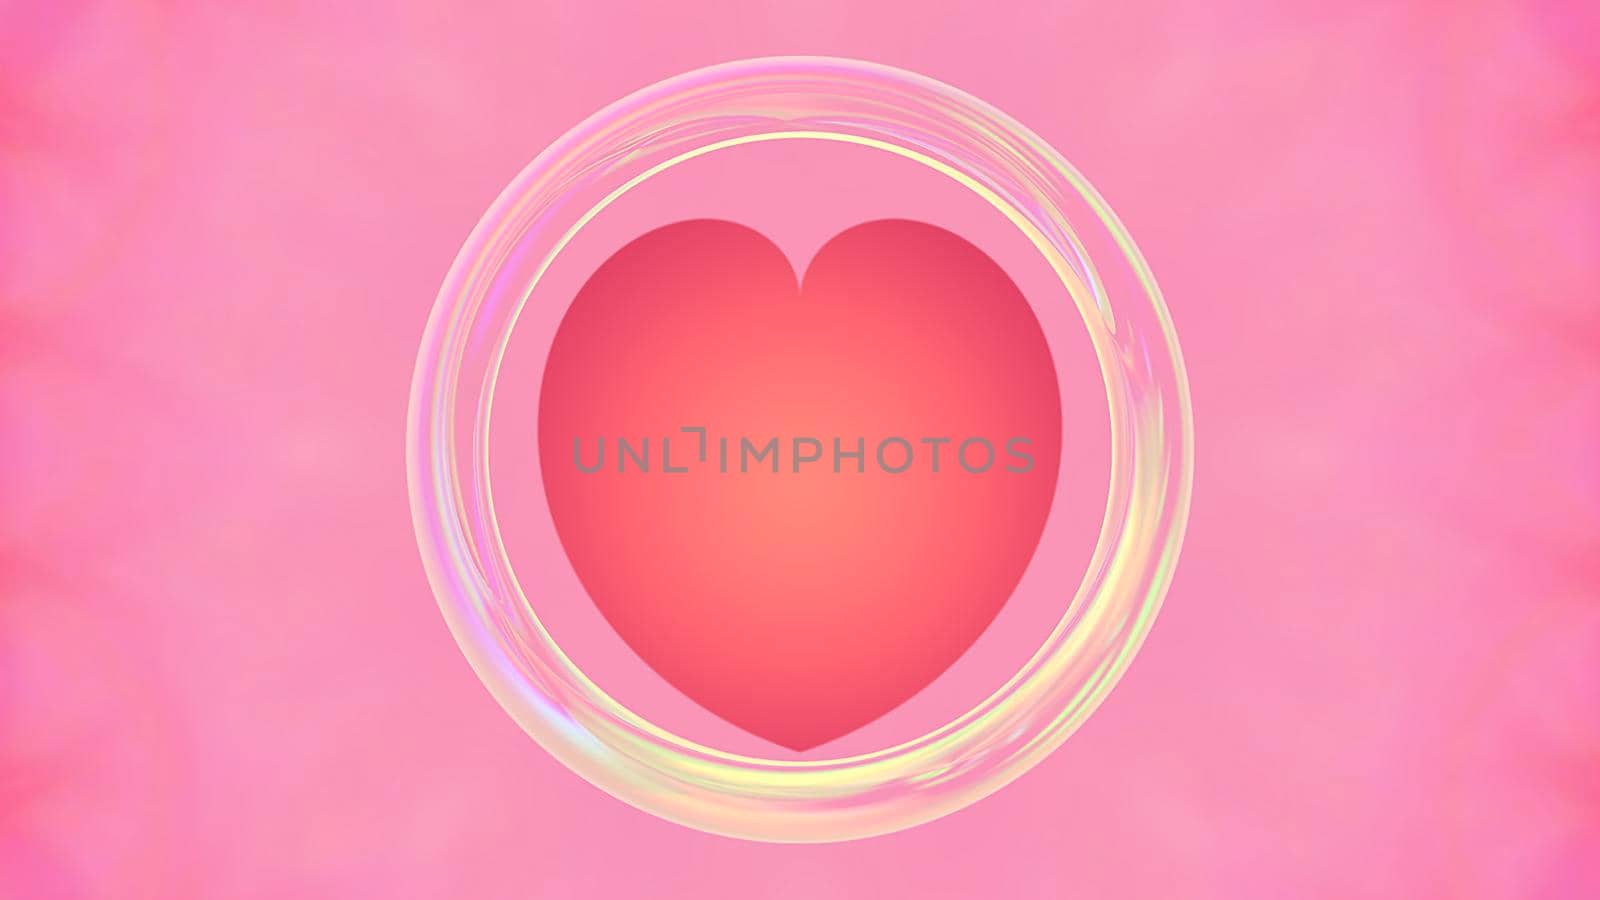 Abstract romantic background with heart. Design, art